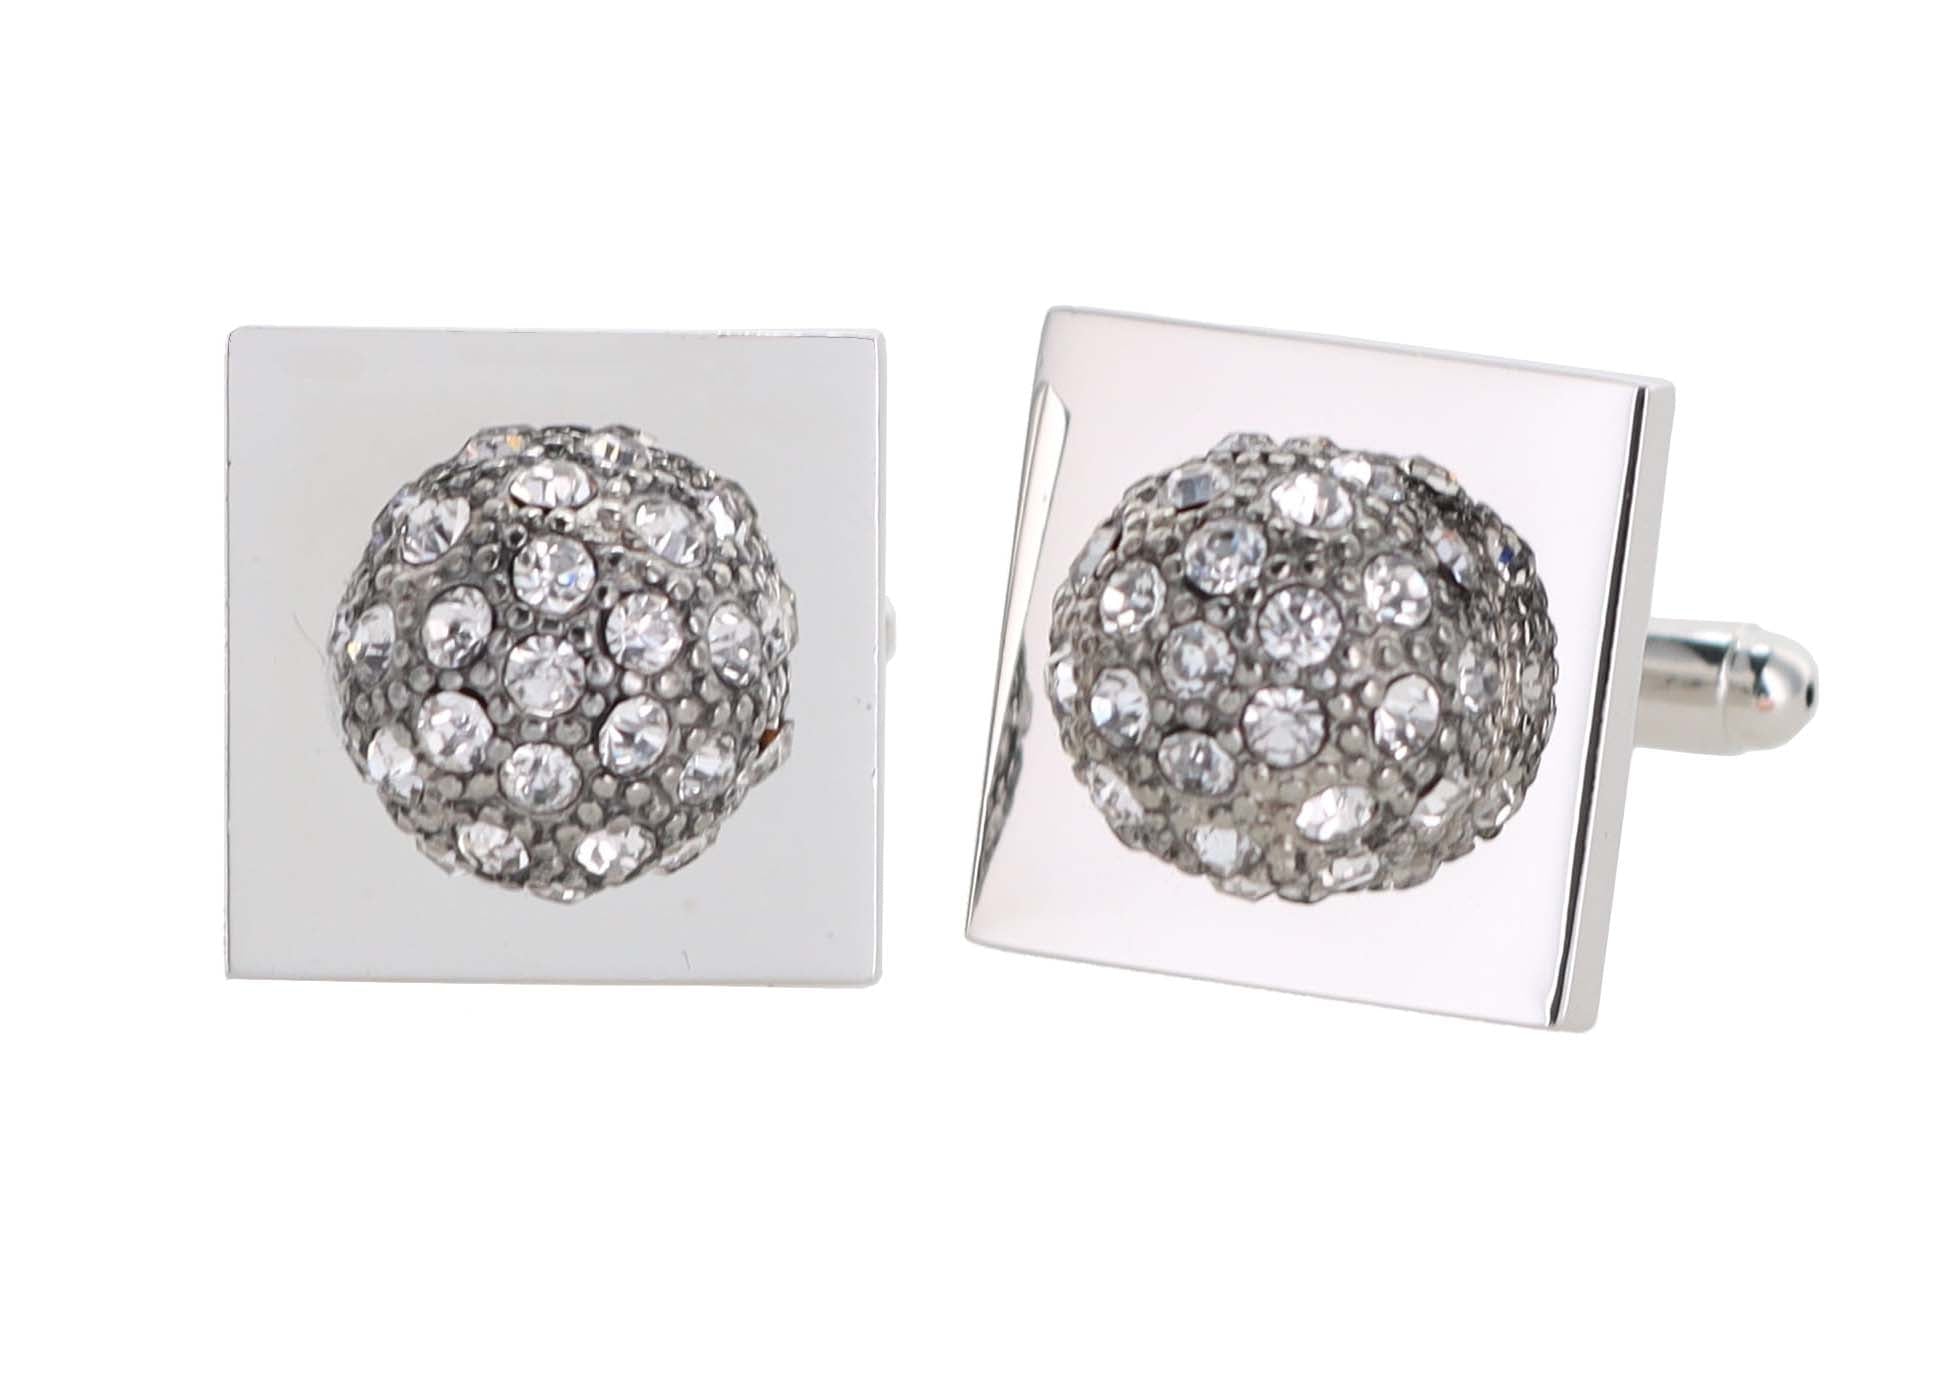 Vittorio Vico Colored Crystal Studded Flower Cufflinks (CL 12XX Series)